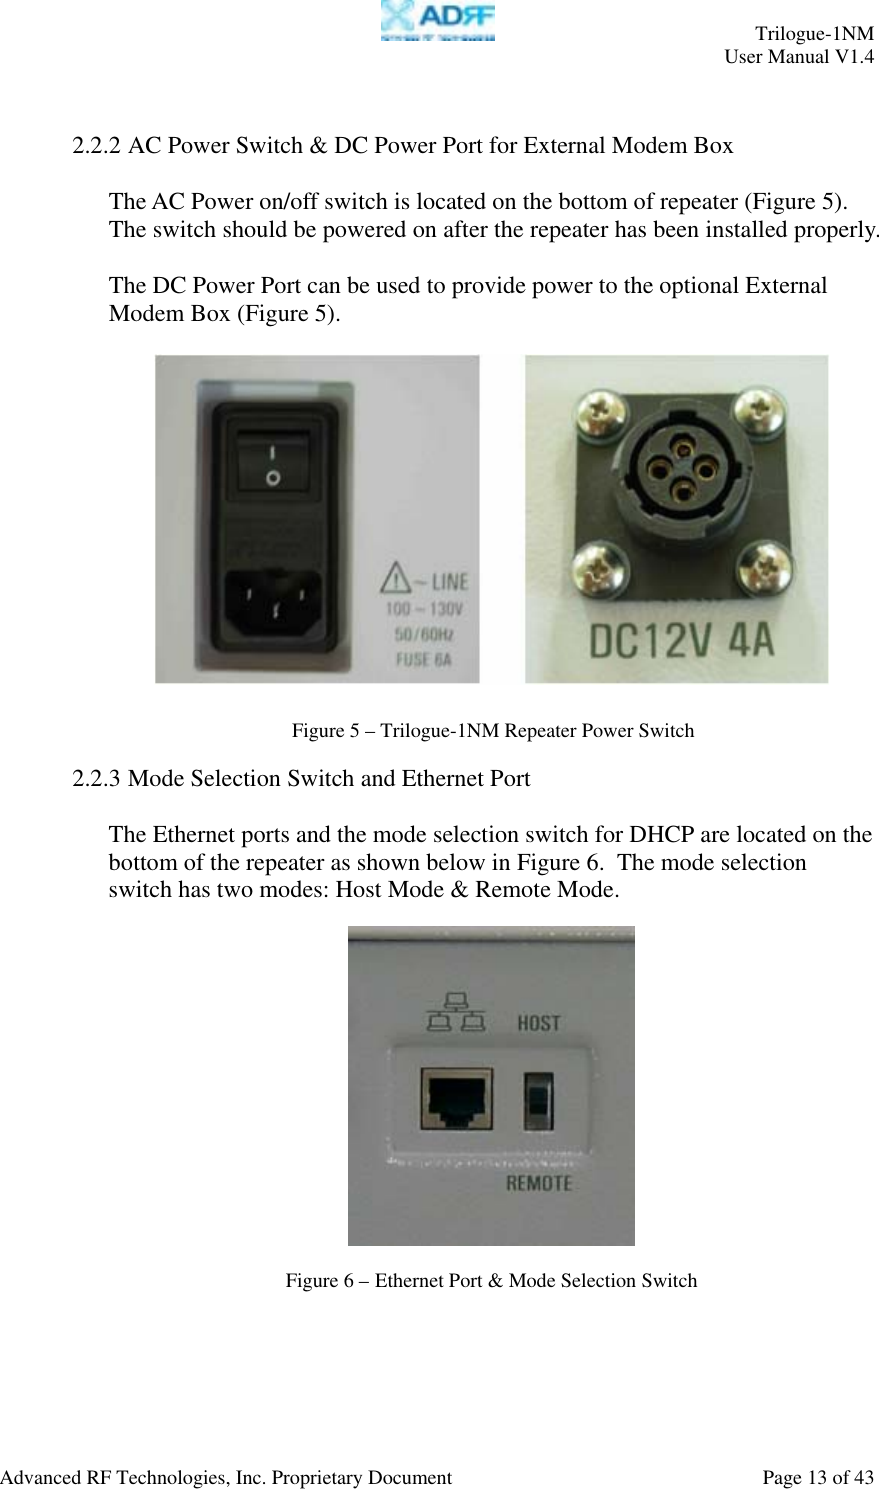     Trilogue-1NM User Manual V1.4  Advanced RF Technologies, Inc. Proprietary Document  Page 13 of 43   2.2.2 AC Power Switch &amp; DC Power Port for External Modem Box  The AC Power on/off switch is located on the bottom of repeater (Figure 5).  The switch should be powered on after the repeater has been installed properly.  The DC Power Port can be used to provide power to the optional External Modem Box (Figure 5).      2.2.3 Mode Selection Switch and Ethernet Port   The Ethernet ports and the mode selection switch for DHCP are located on the bottom of the repeater as shown below in Figure 6.  The mode selection switch has two modes: Host Mode &amp; Remote Mode.    Figure 6 – Ethernet Port &amp; Mode Selection Switch  Figure 5 – Trilogue-1NM Repeater Power Switch 